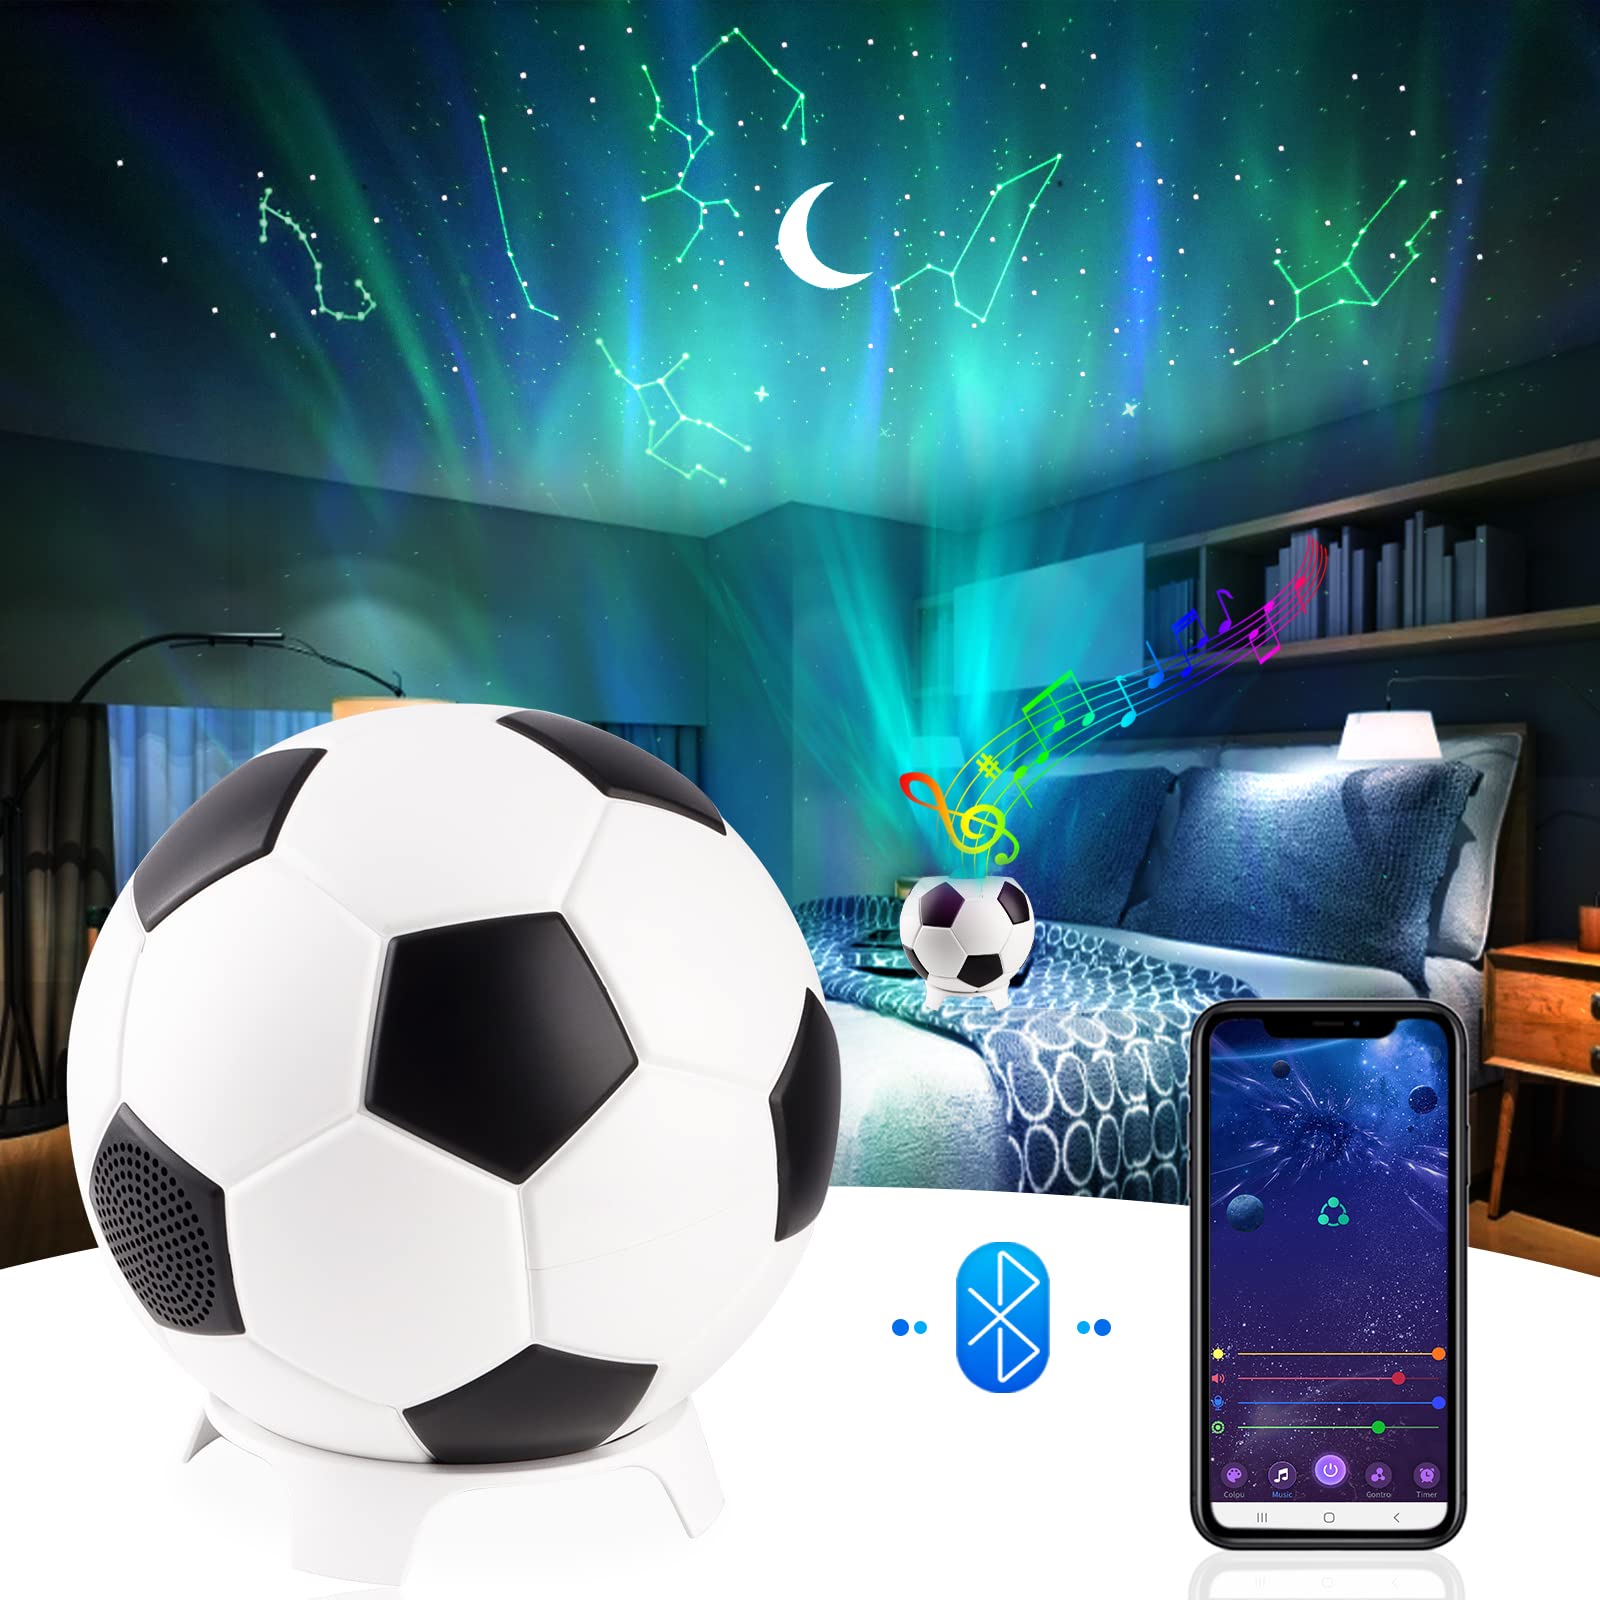 Constellations Star Porjector Night Light Soccer Football Design Northern Lighting Lamp with Bluetooth Music Speaker USB Charger Aurora Sky Ambianc...